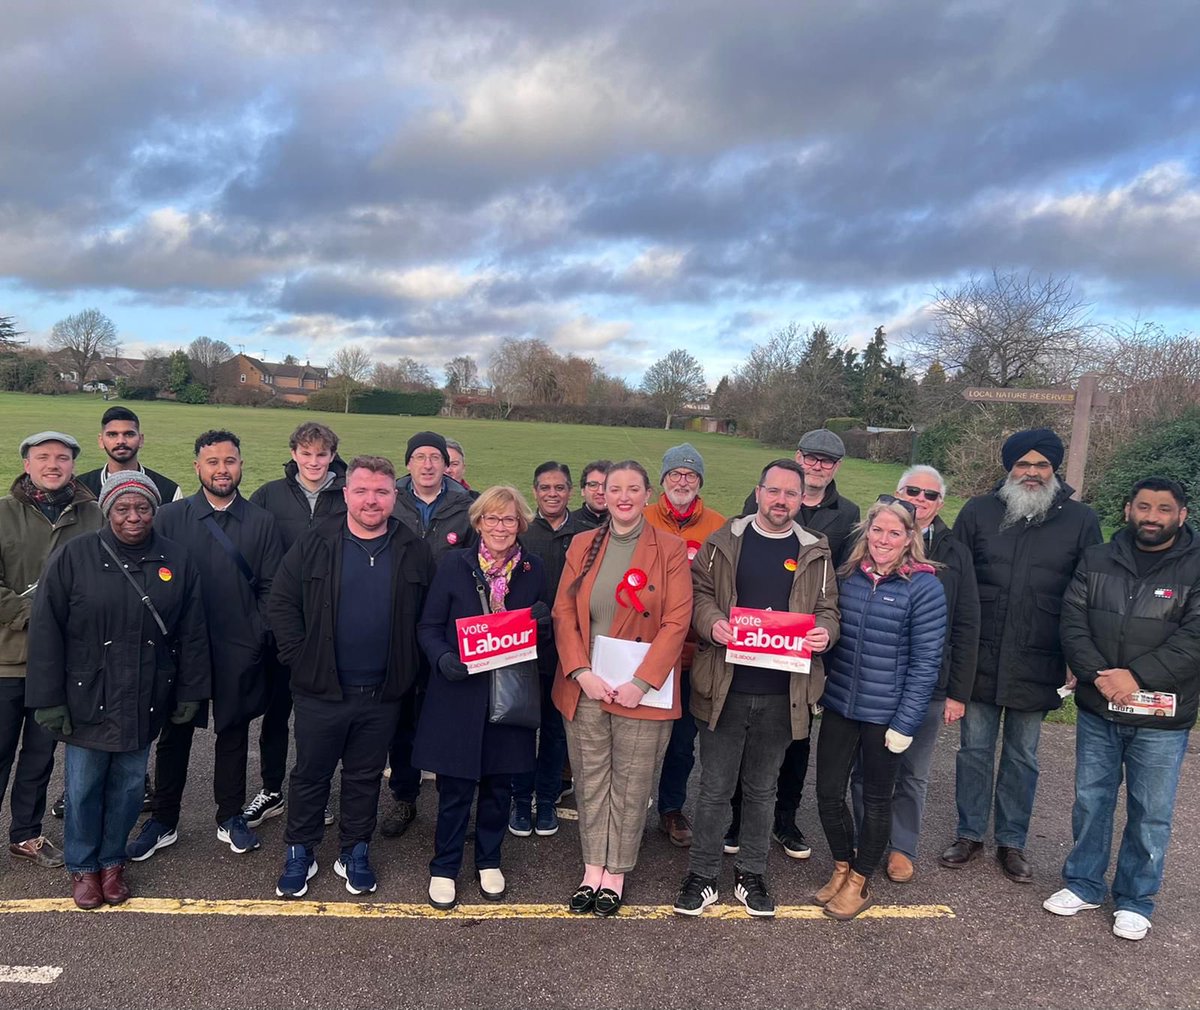 Amazing turnout of #Labour supporters canvassing and leafleting in #GlenParva and #Blaby this afternoon for our brilliant candidate LAURA BADLAND.